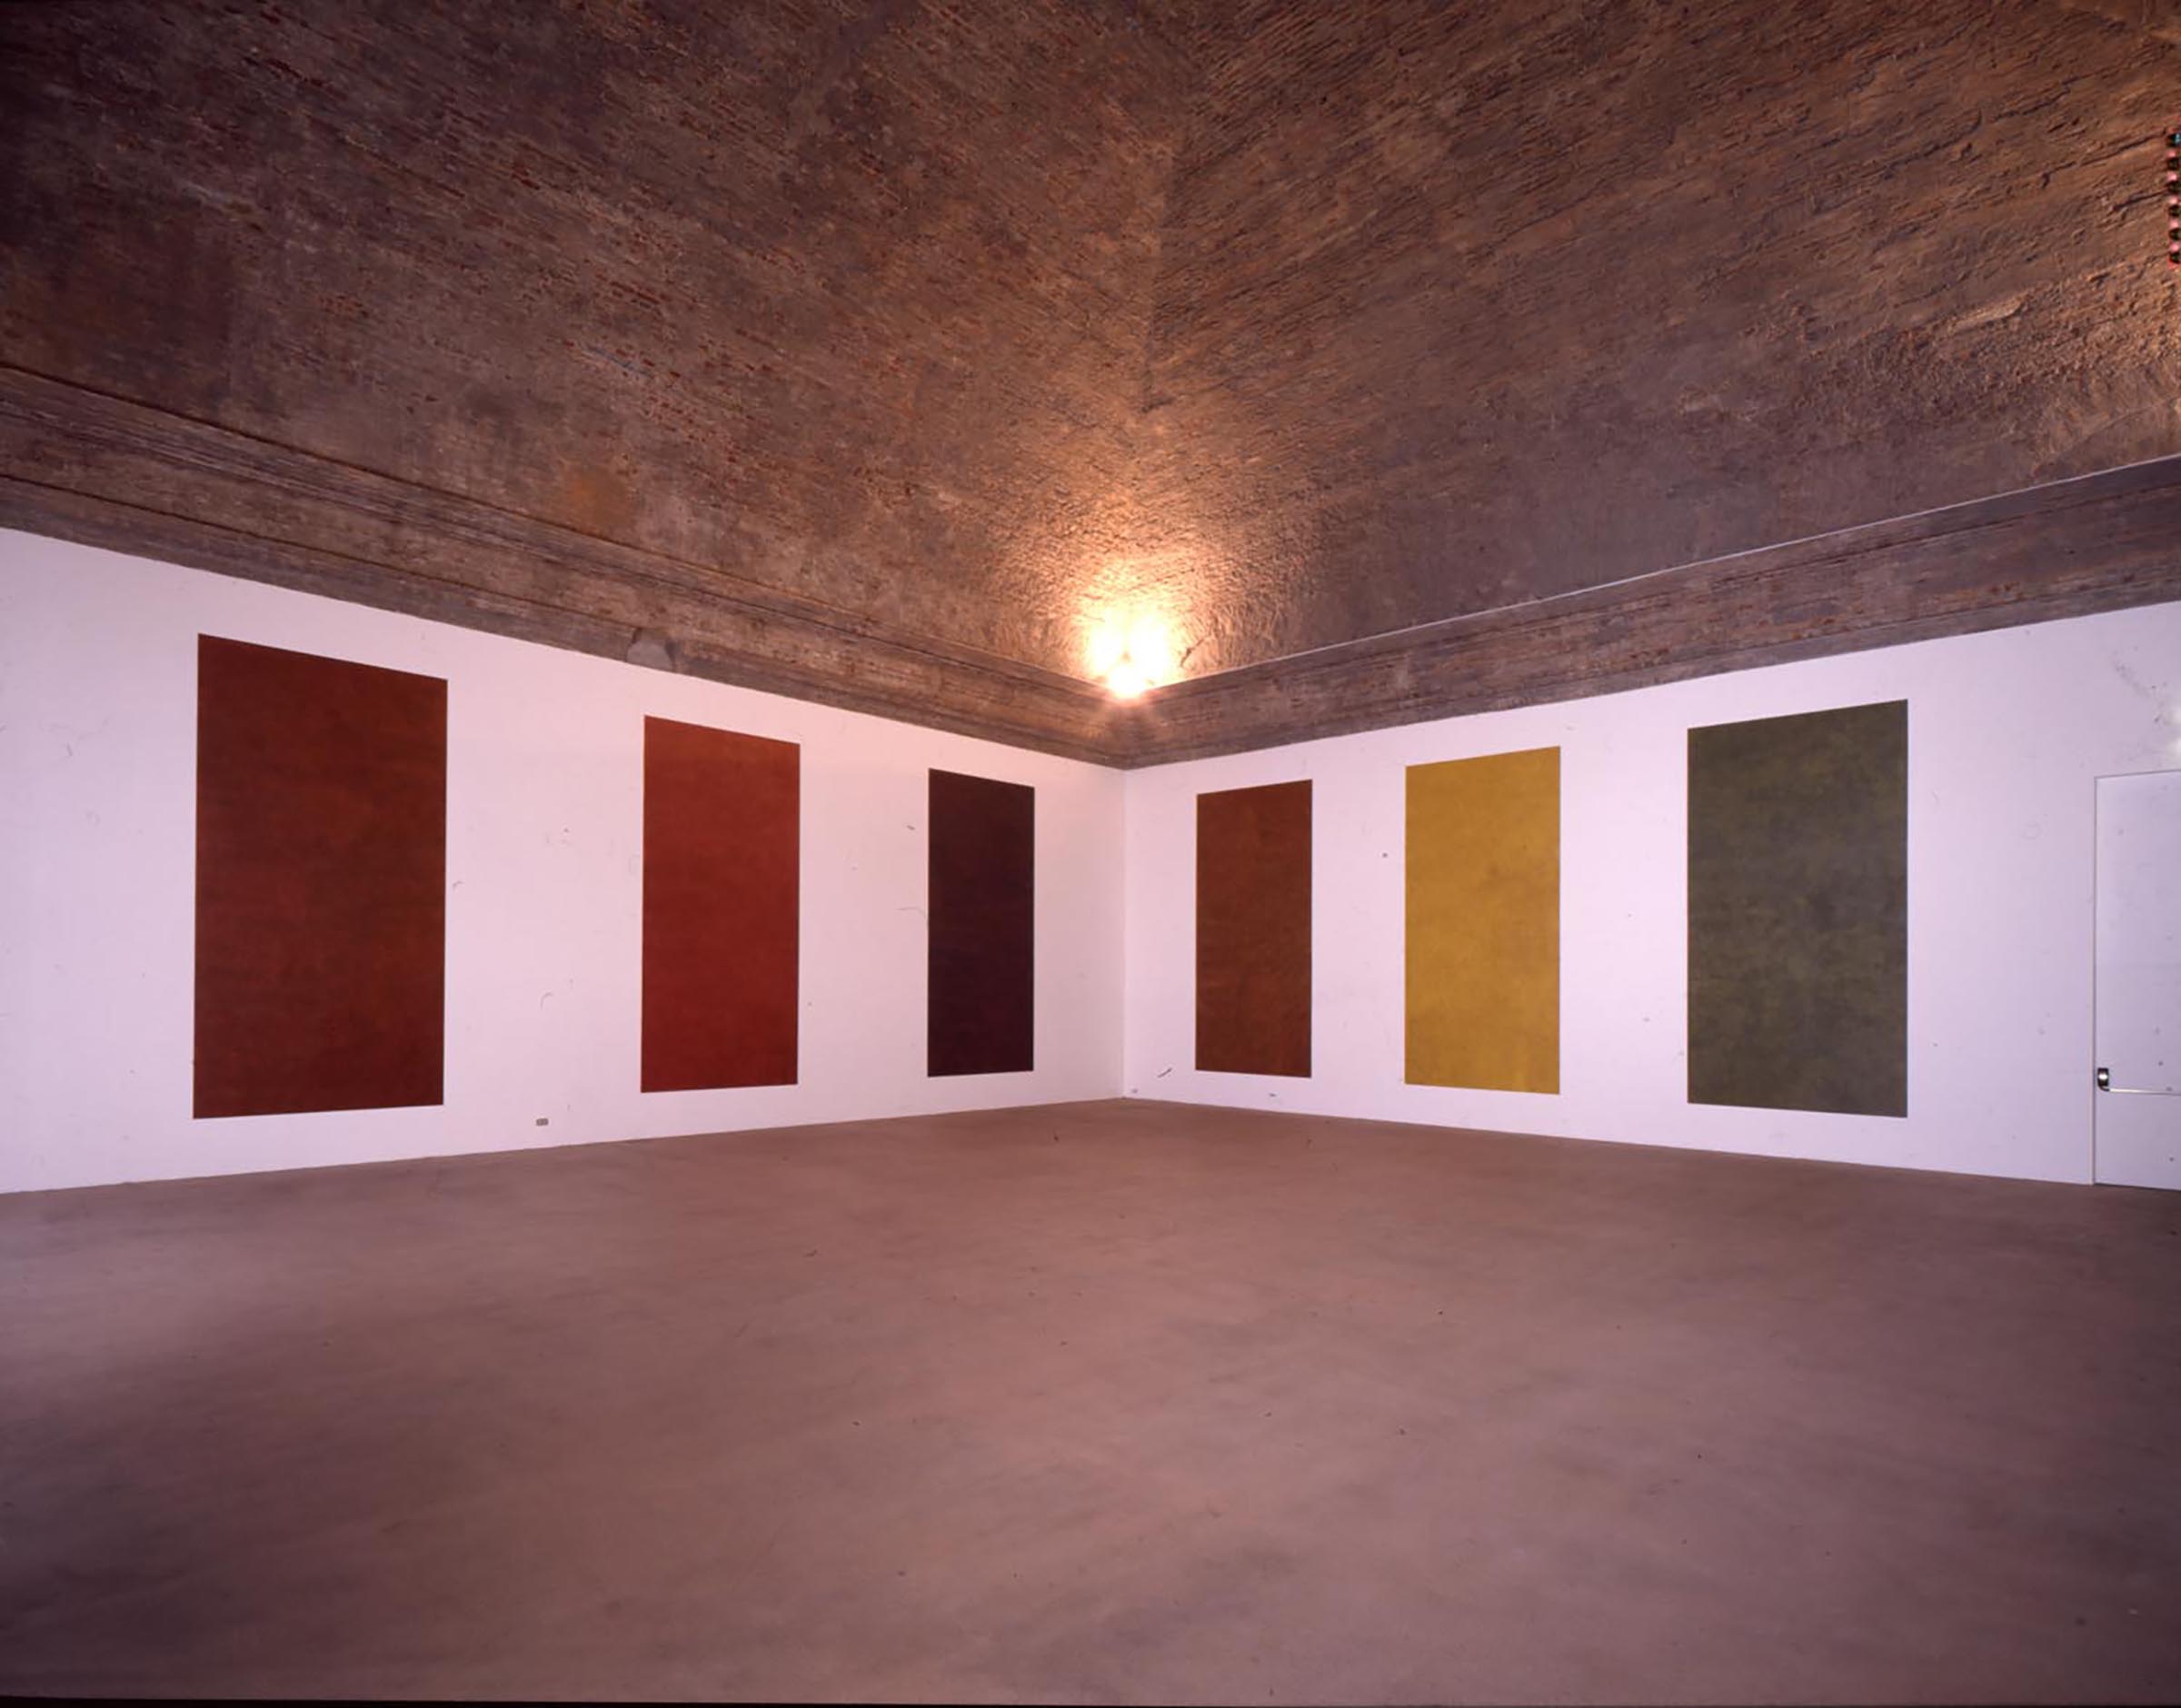 Sol LeWitt, Coloured rectangles with grid, 1991